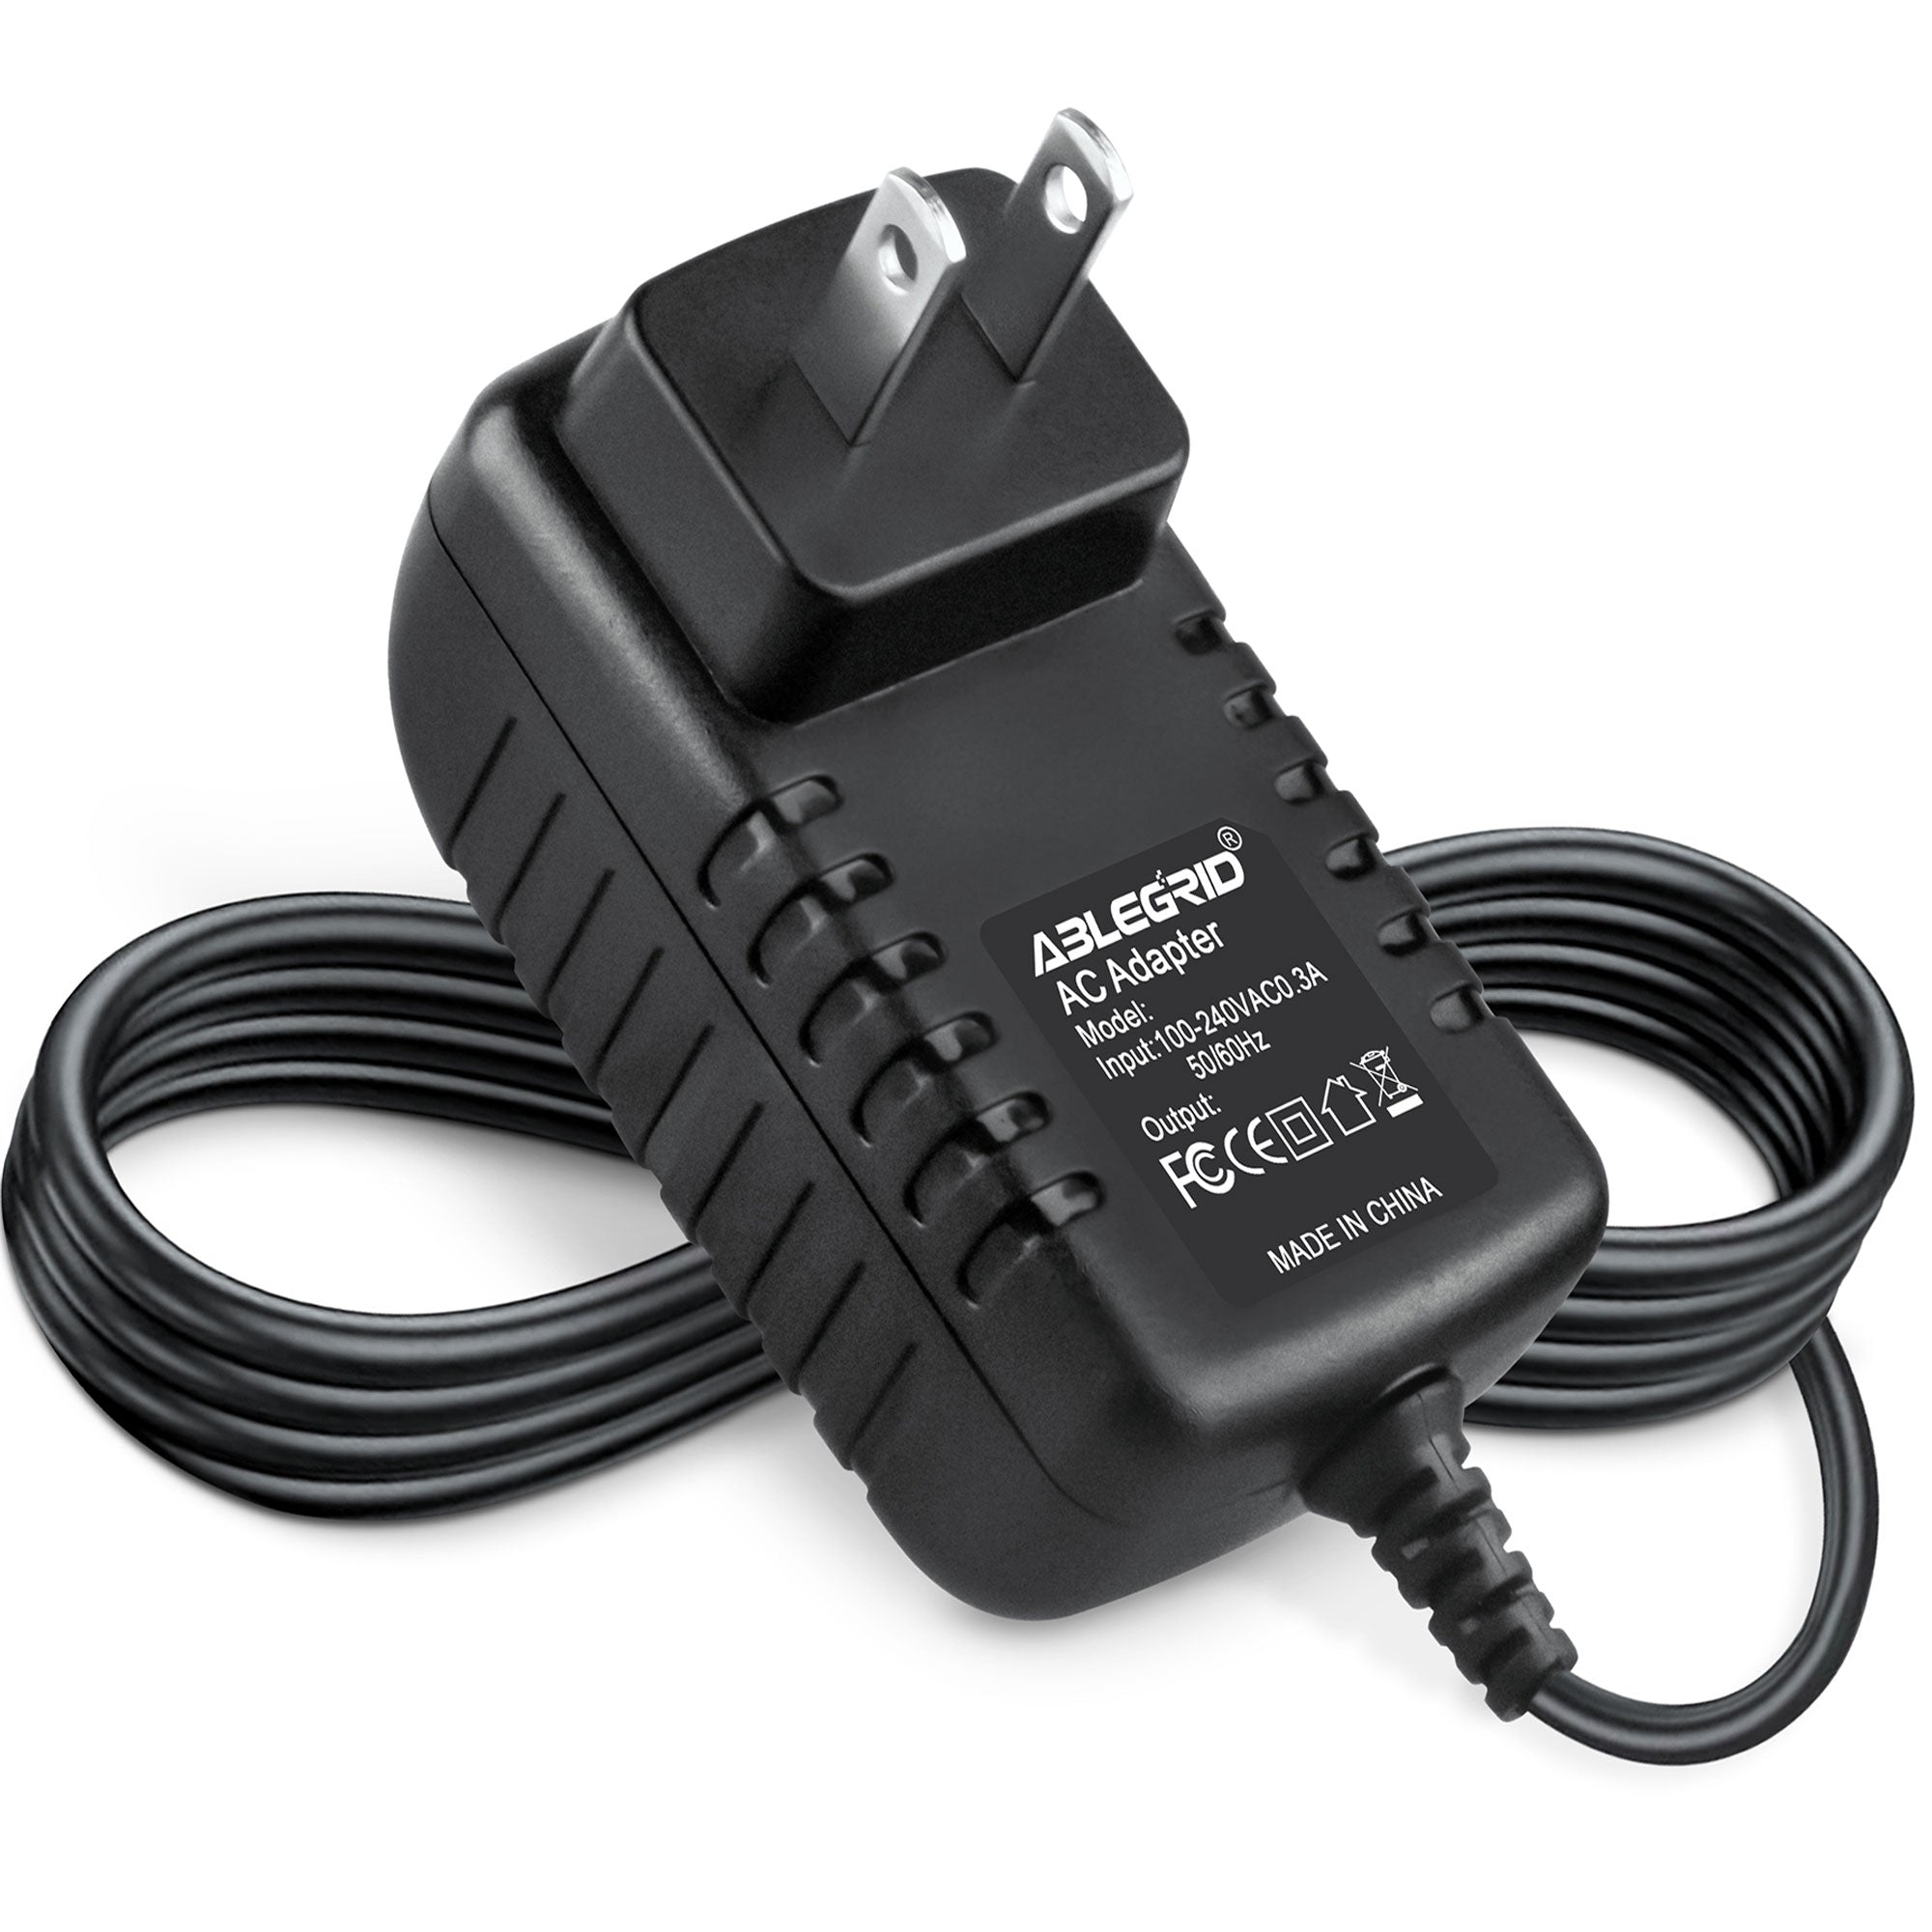 AbleGrid AC Adapter for AR SuperTooth BTD2 Acoustic Research ARS60RD-A ARS60-A Audio PSU